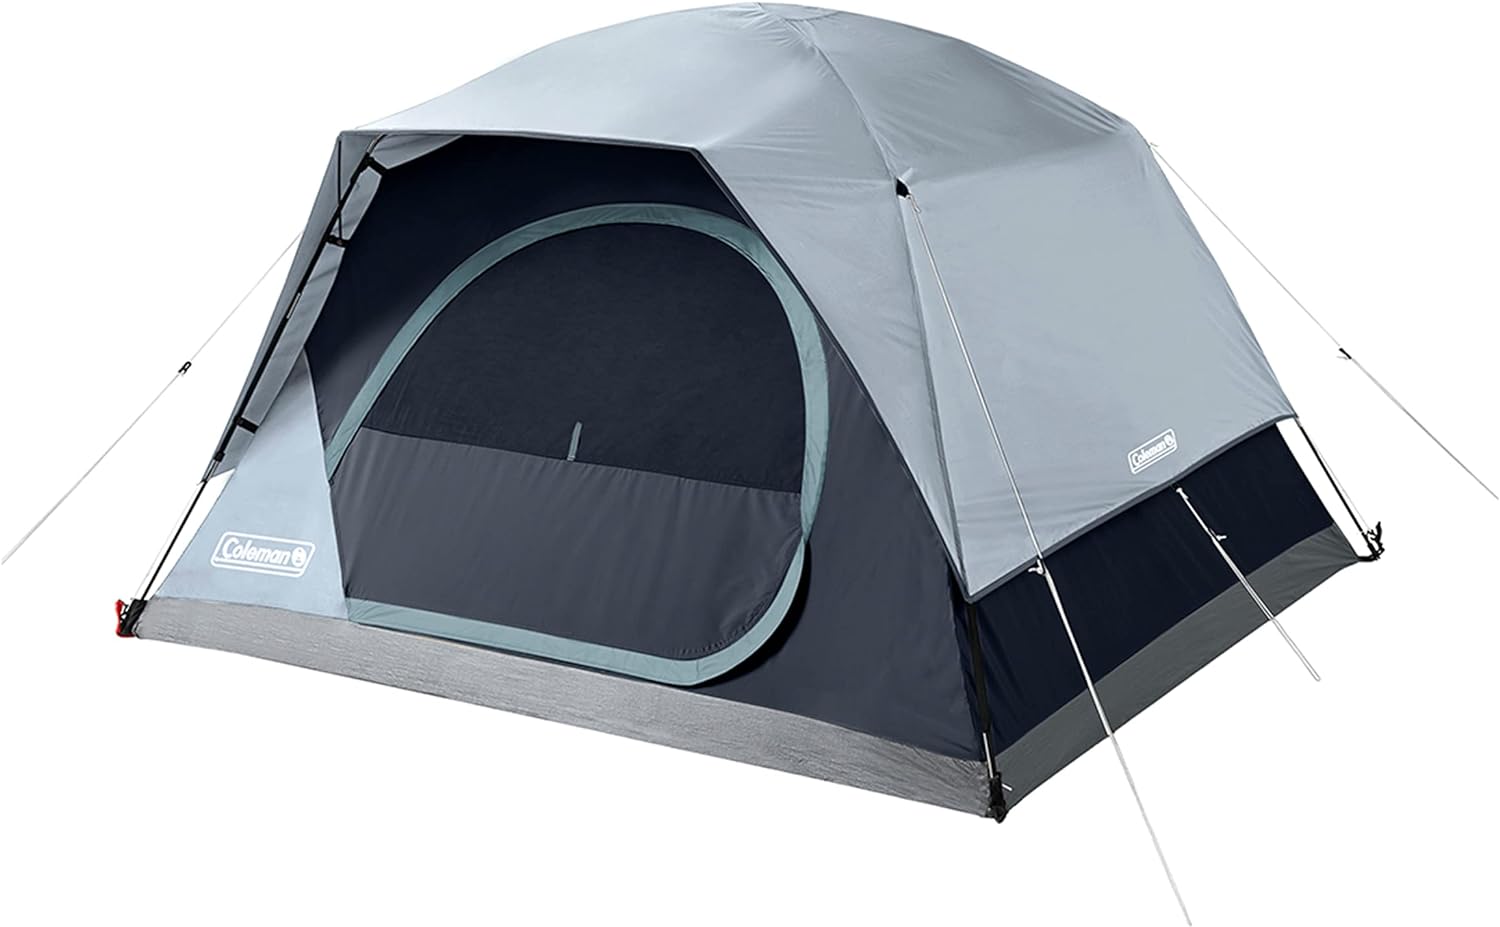 Coleman Skydome Camping Tent with LED Lights, Weatherproof 4/8 Person Family Tent Includes Pre-Attached Poles, Rainfly, Carry Bag, Ventilation and LED Lighting System, Sets Up in 5 Minutes